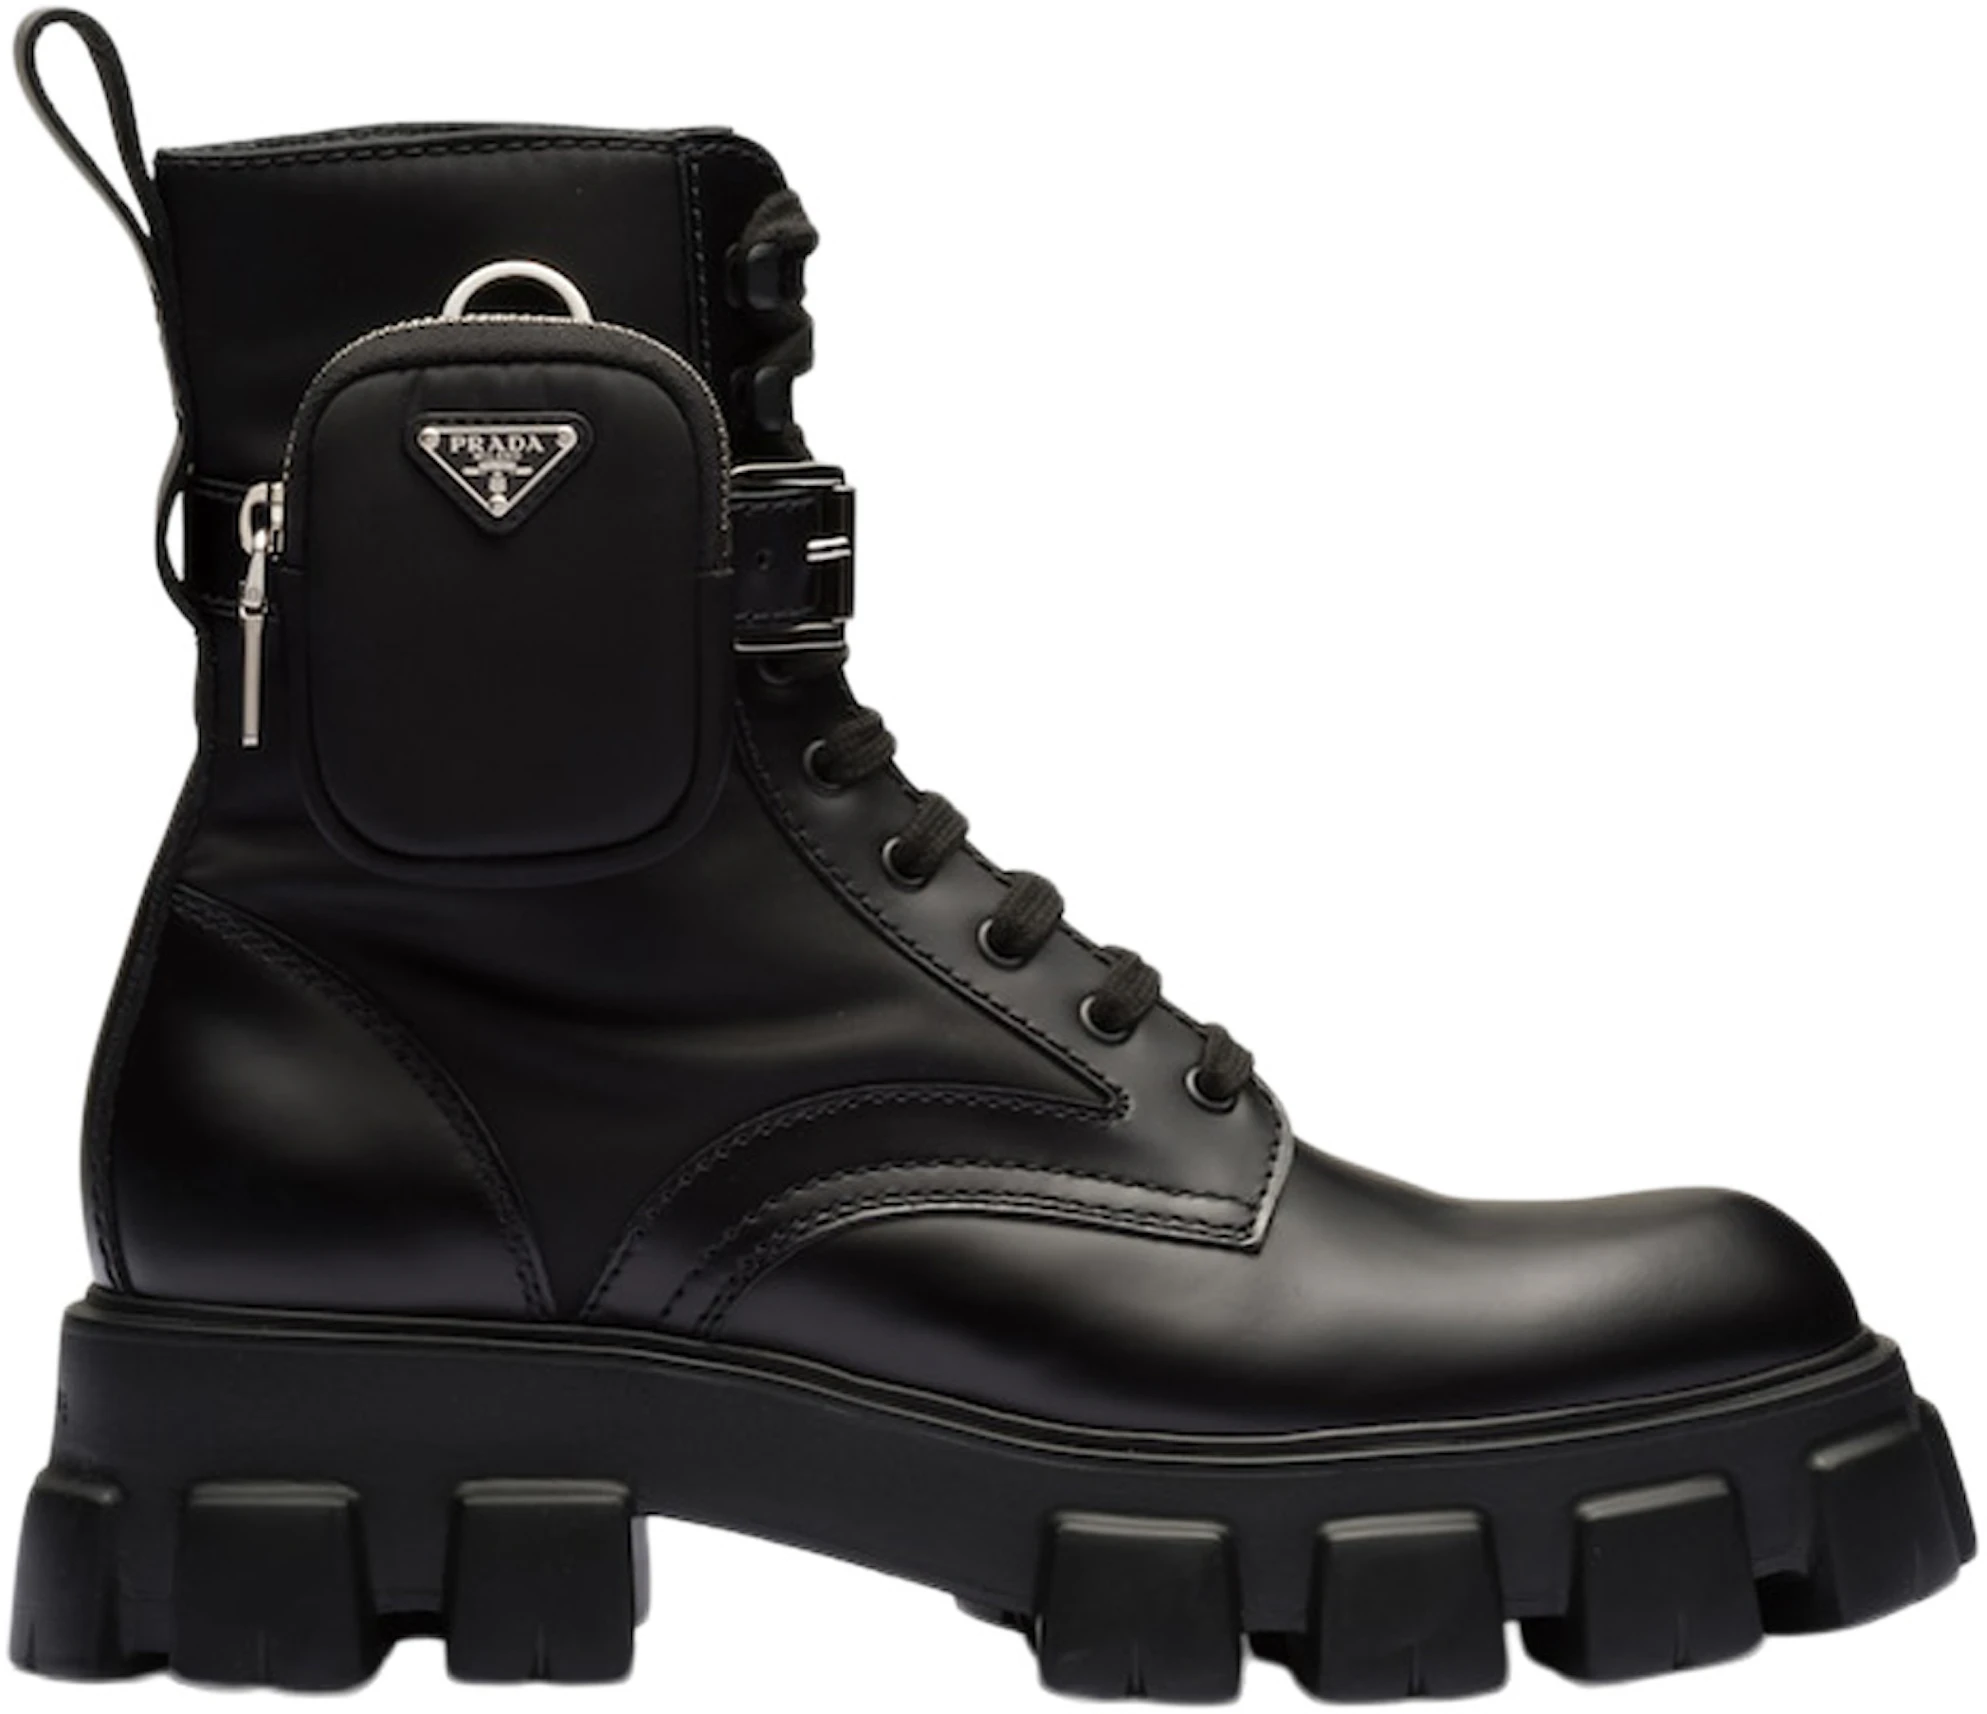 Buy Prada Boots Shoes & New Sneakers - StockX